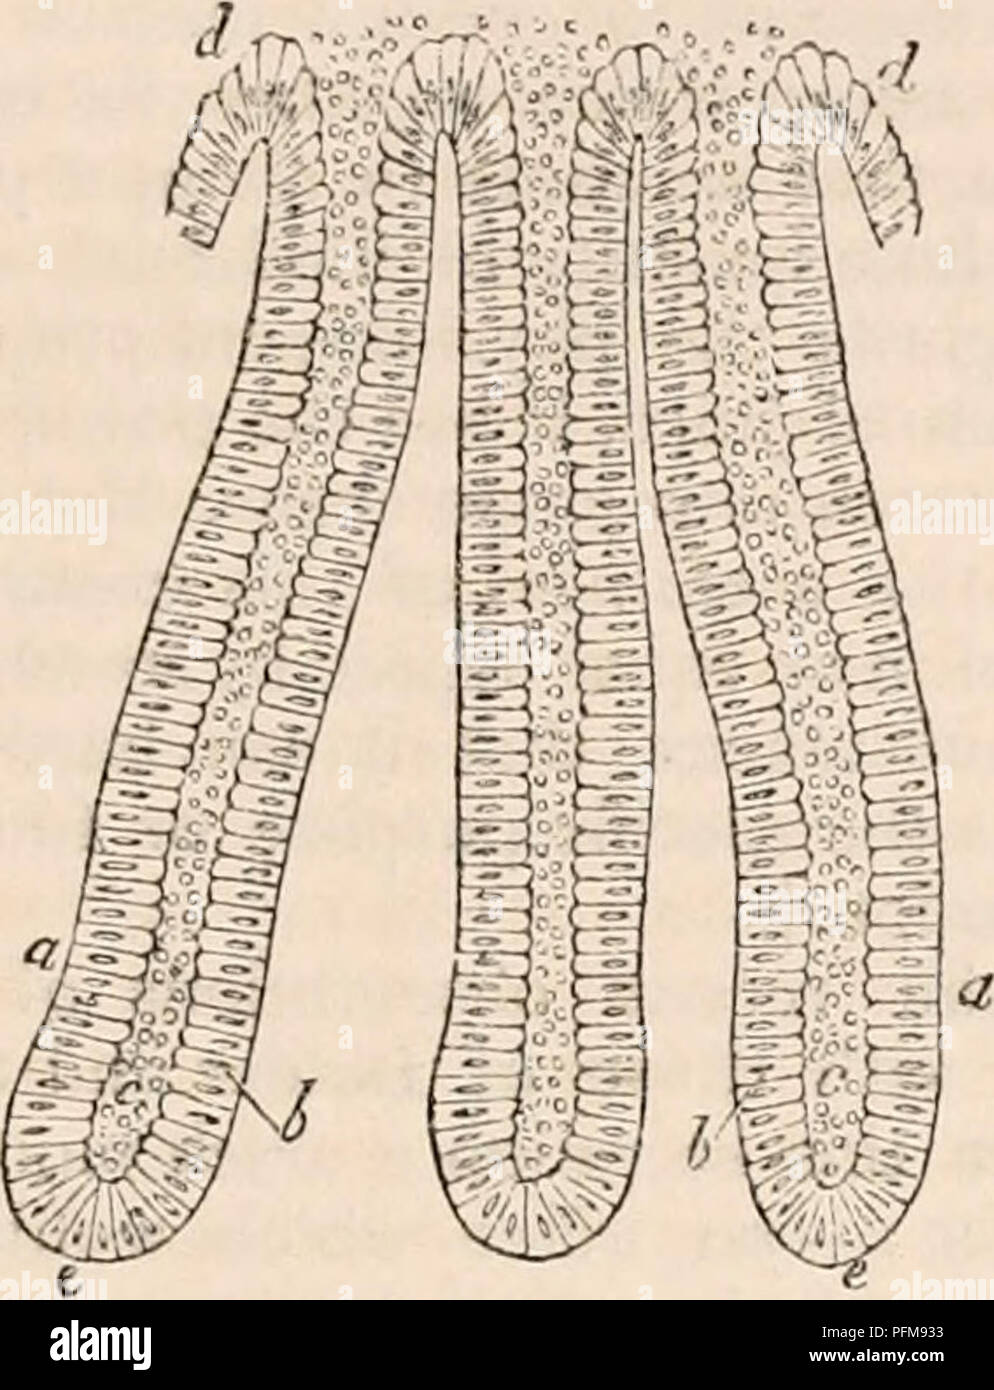 . The cyclopædia of anatomy and physiology. Anatomy; Physiology; Zoology. STOMACH AND INTESTINE. 34,7 large intestine. An' allusion has already been made to the fact that, in many animals, they appear to usurp a portion of the gastric cavity. While the importance which this wide distri- bution would imply, is confirmed by their im- mense number ; which is such that we may estimate their aggregate surface as from ten to fifteen times that of the cylinder of intes- tine into which they open. Each tube may be described as a hollow cylinder, having a length which is about five times its width, and Stock Photo